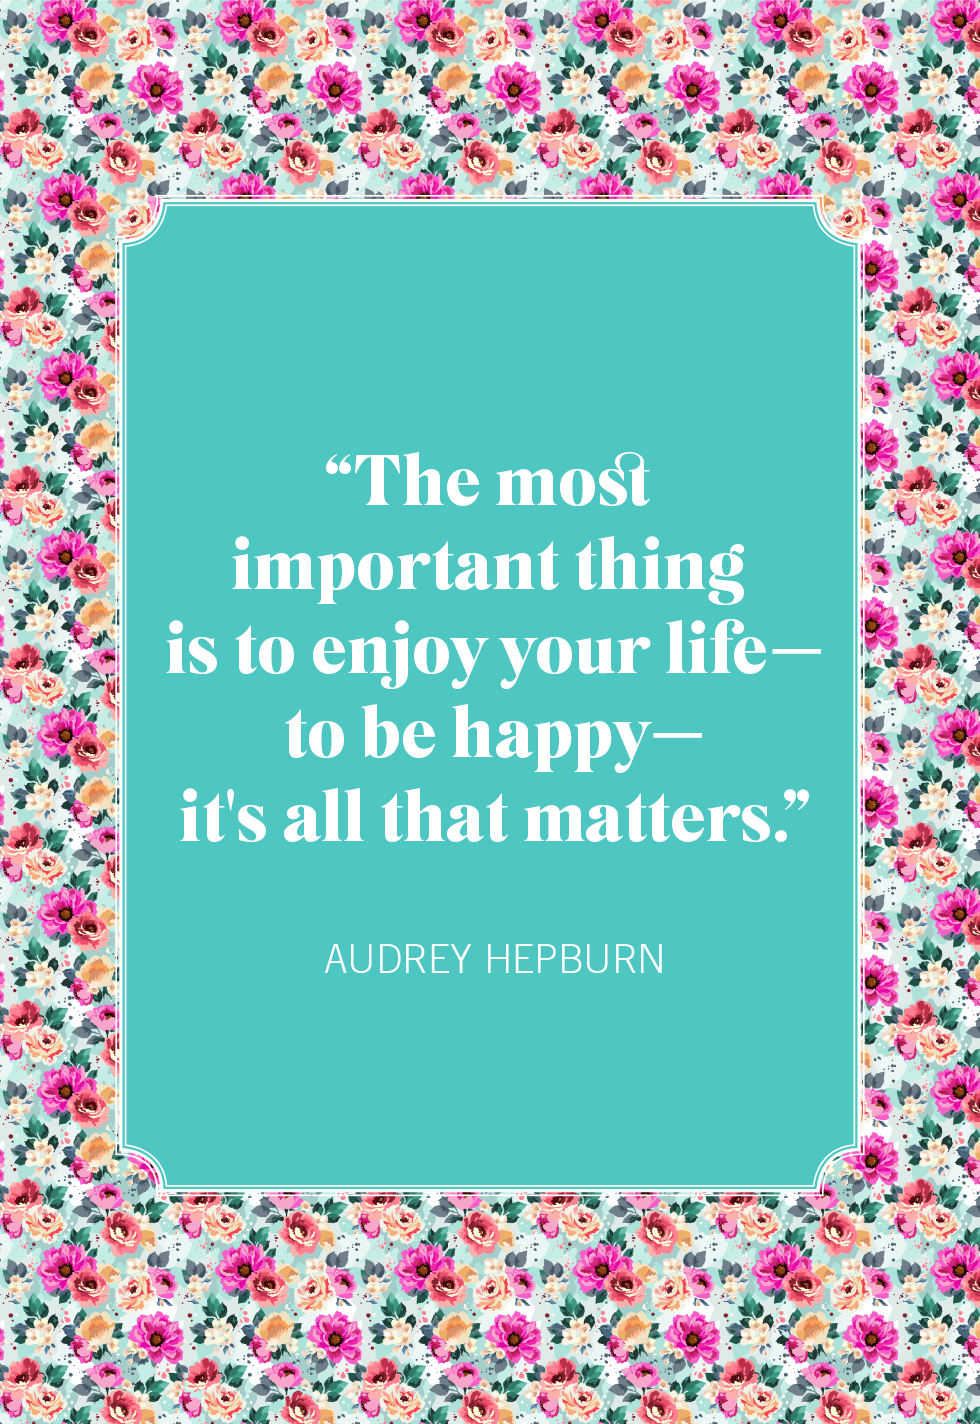 meaningful quotes about life and happiness